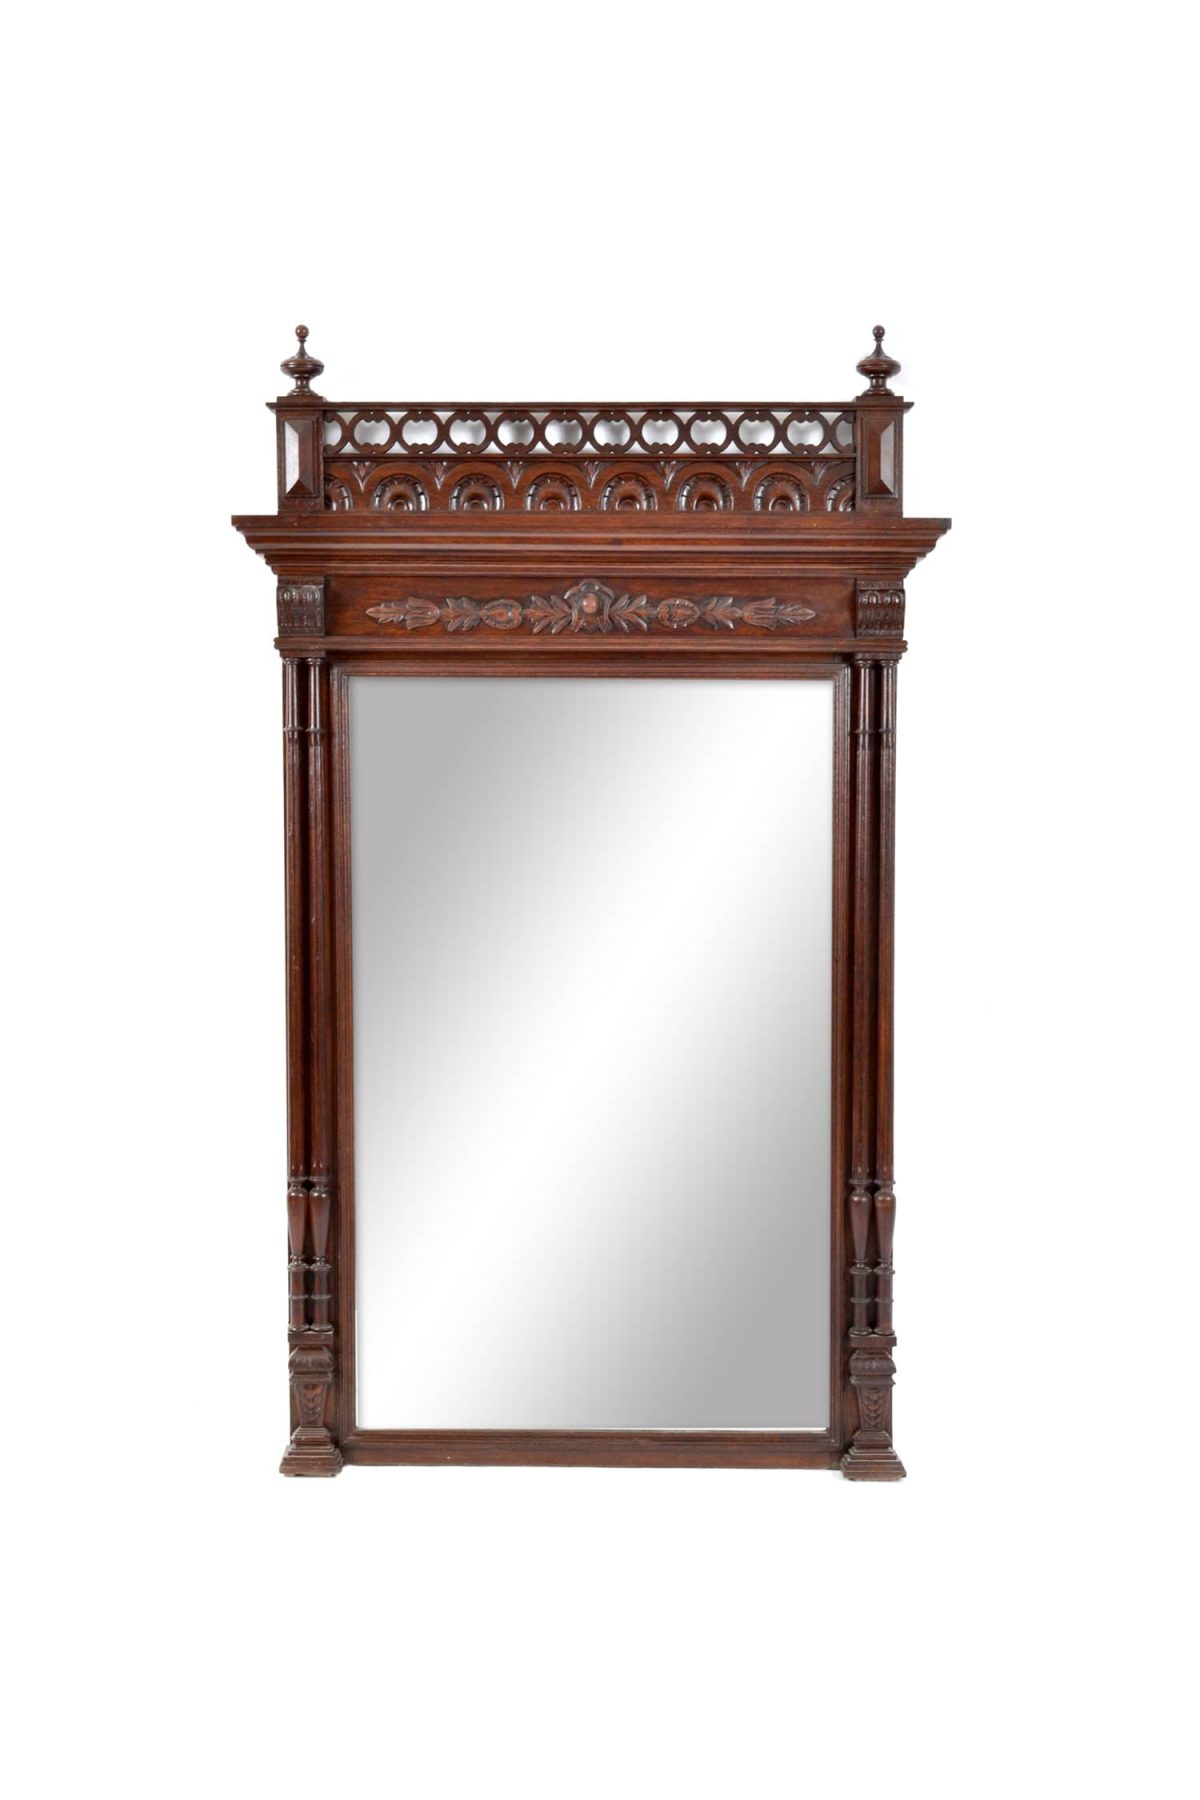 19TH Century. French HENRY II Style Beveled Mirror